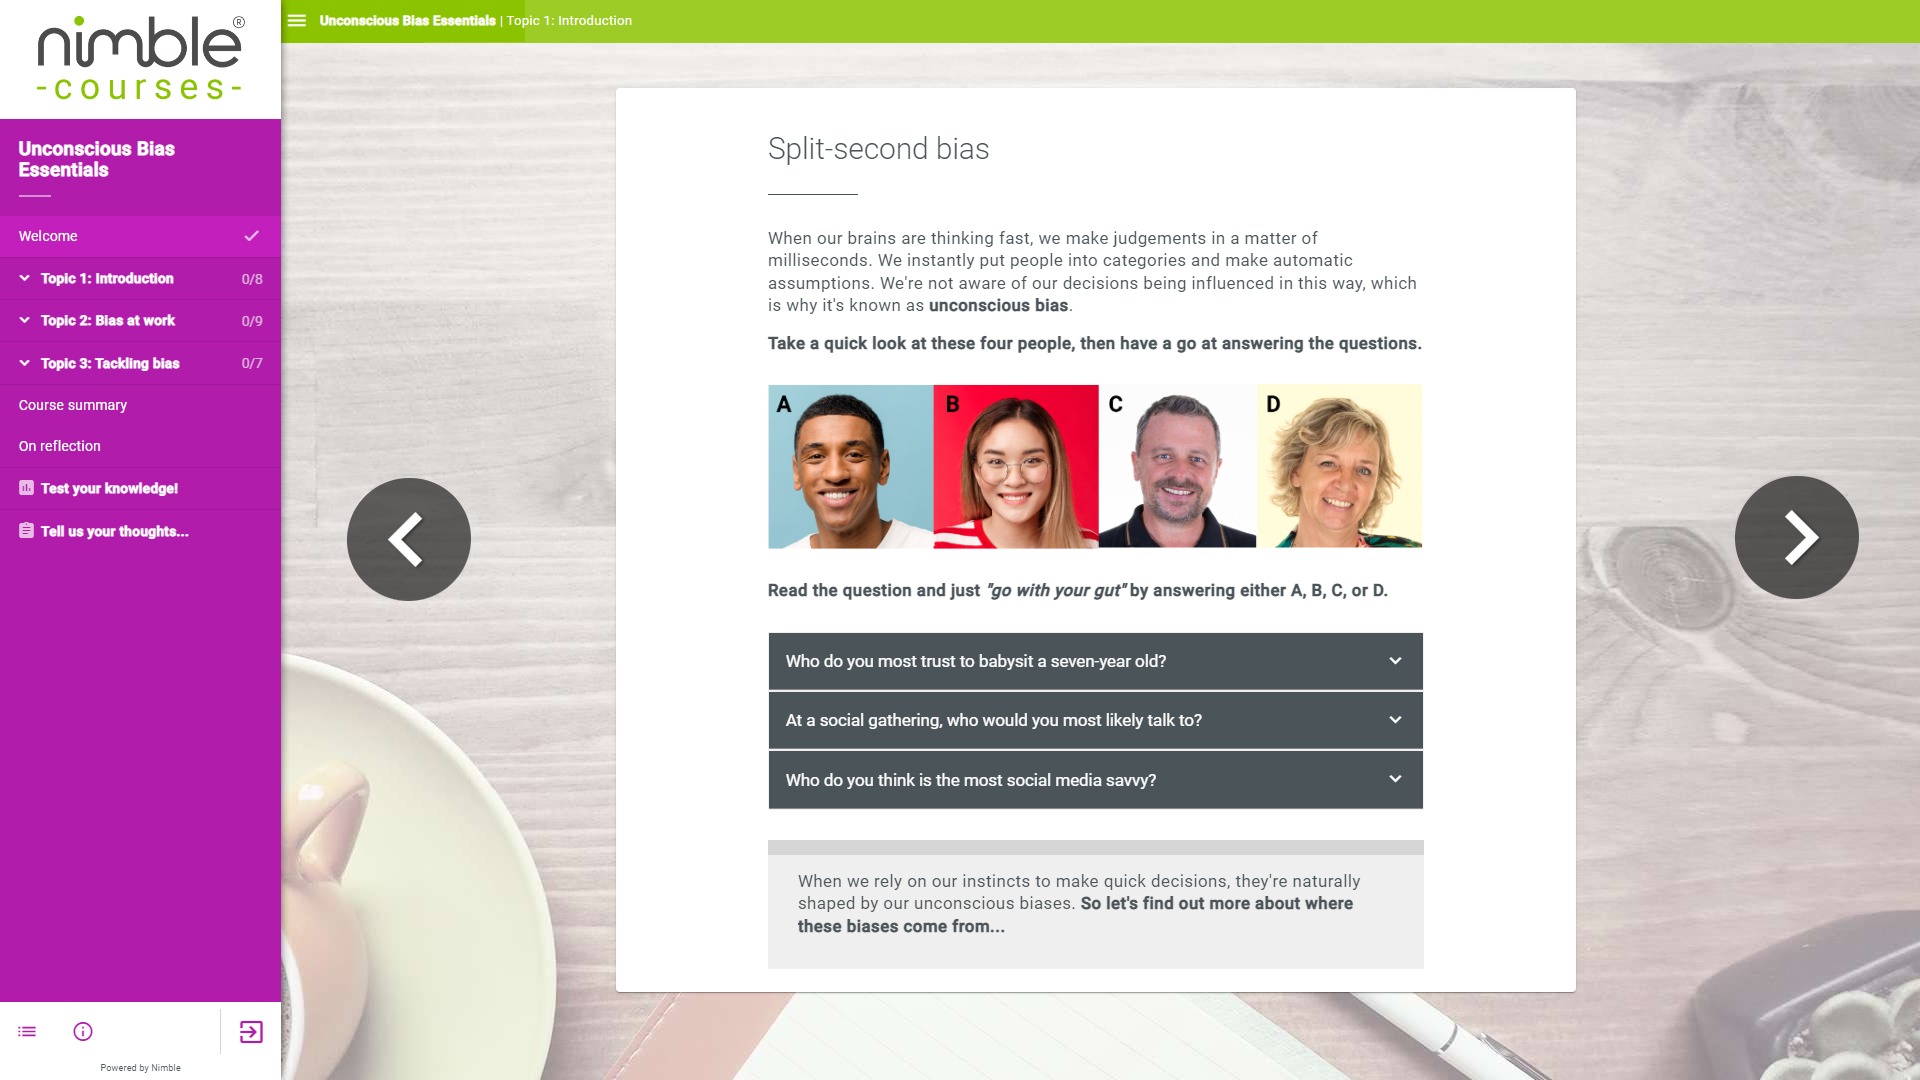 Screenshot from one of the pages in the Unconscious Bias Essentials course from Nimble Elearning. Shows course content and the menus needed to move through the course.